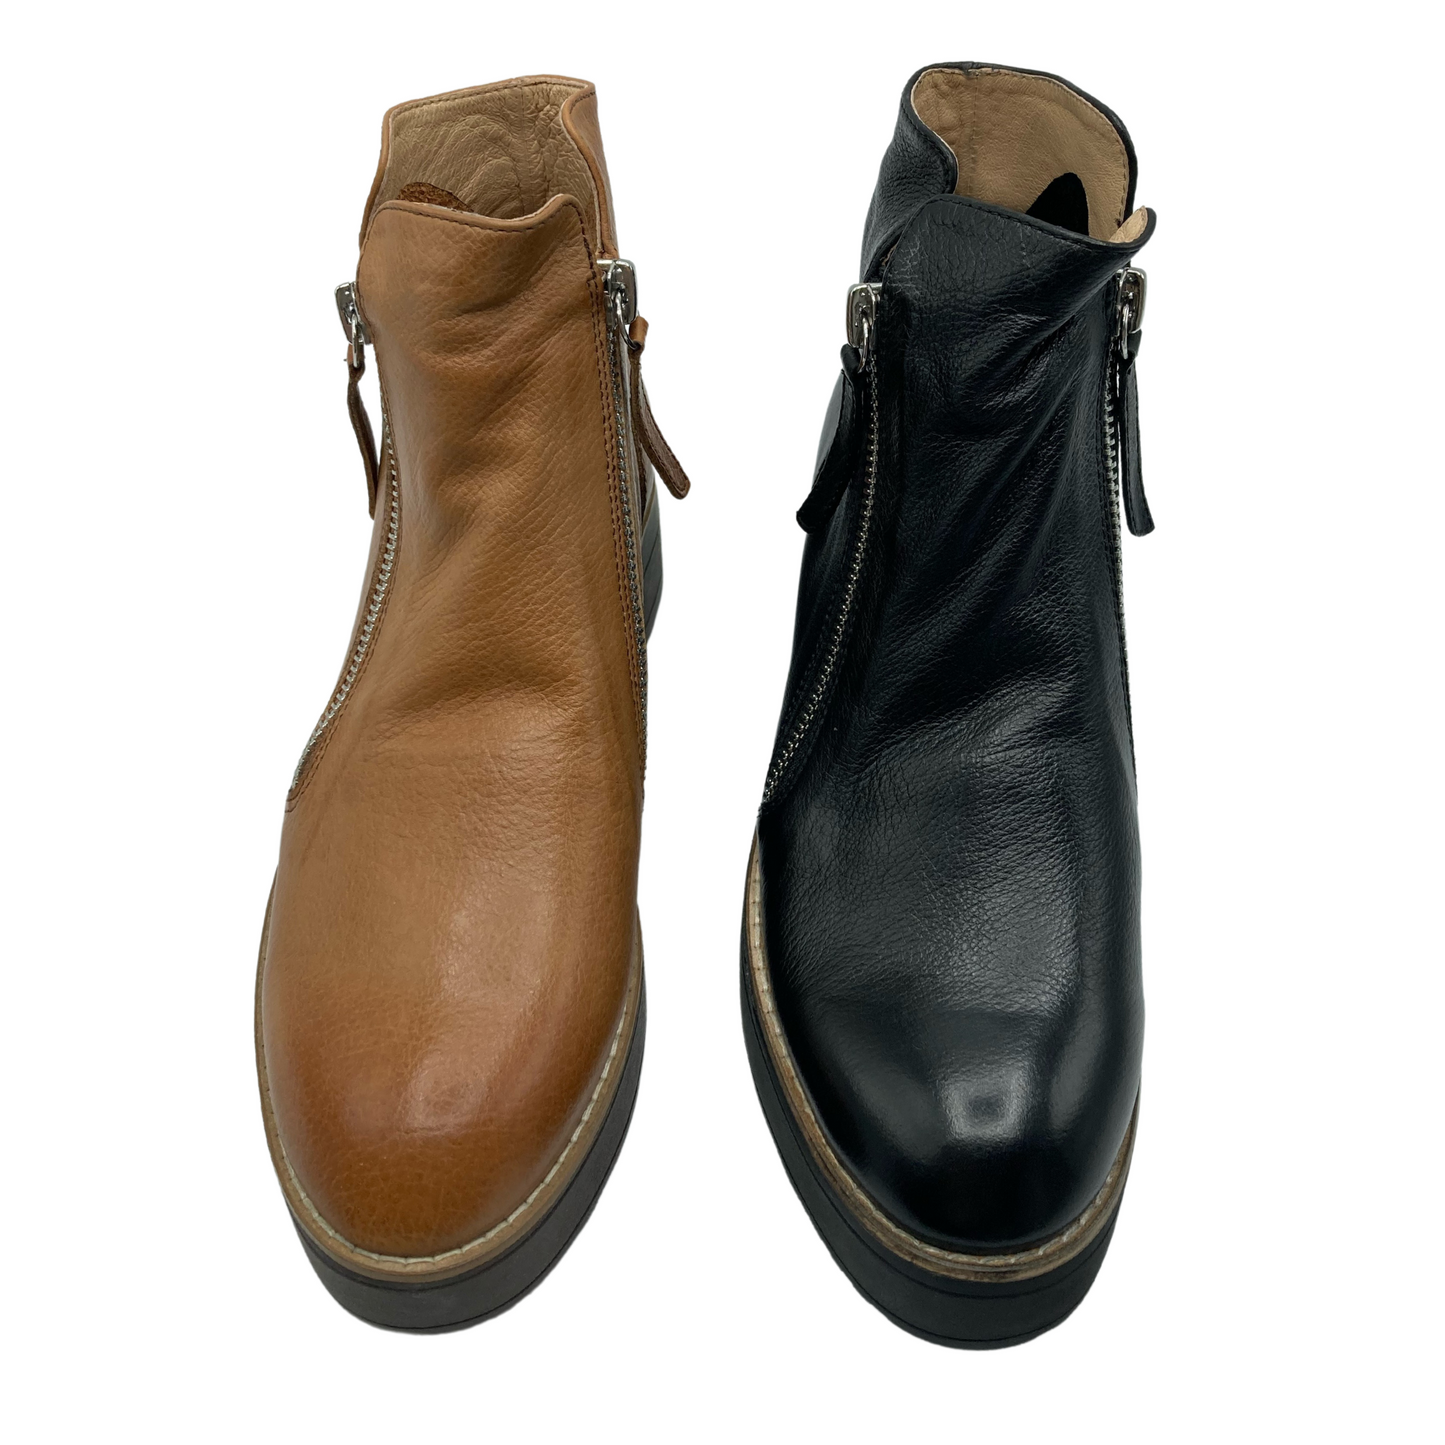 Top view of one cognac leather boot and one black leather boot side by side